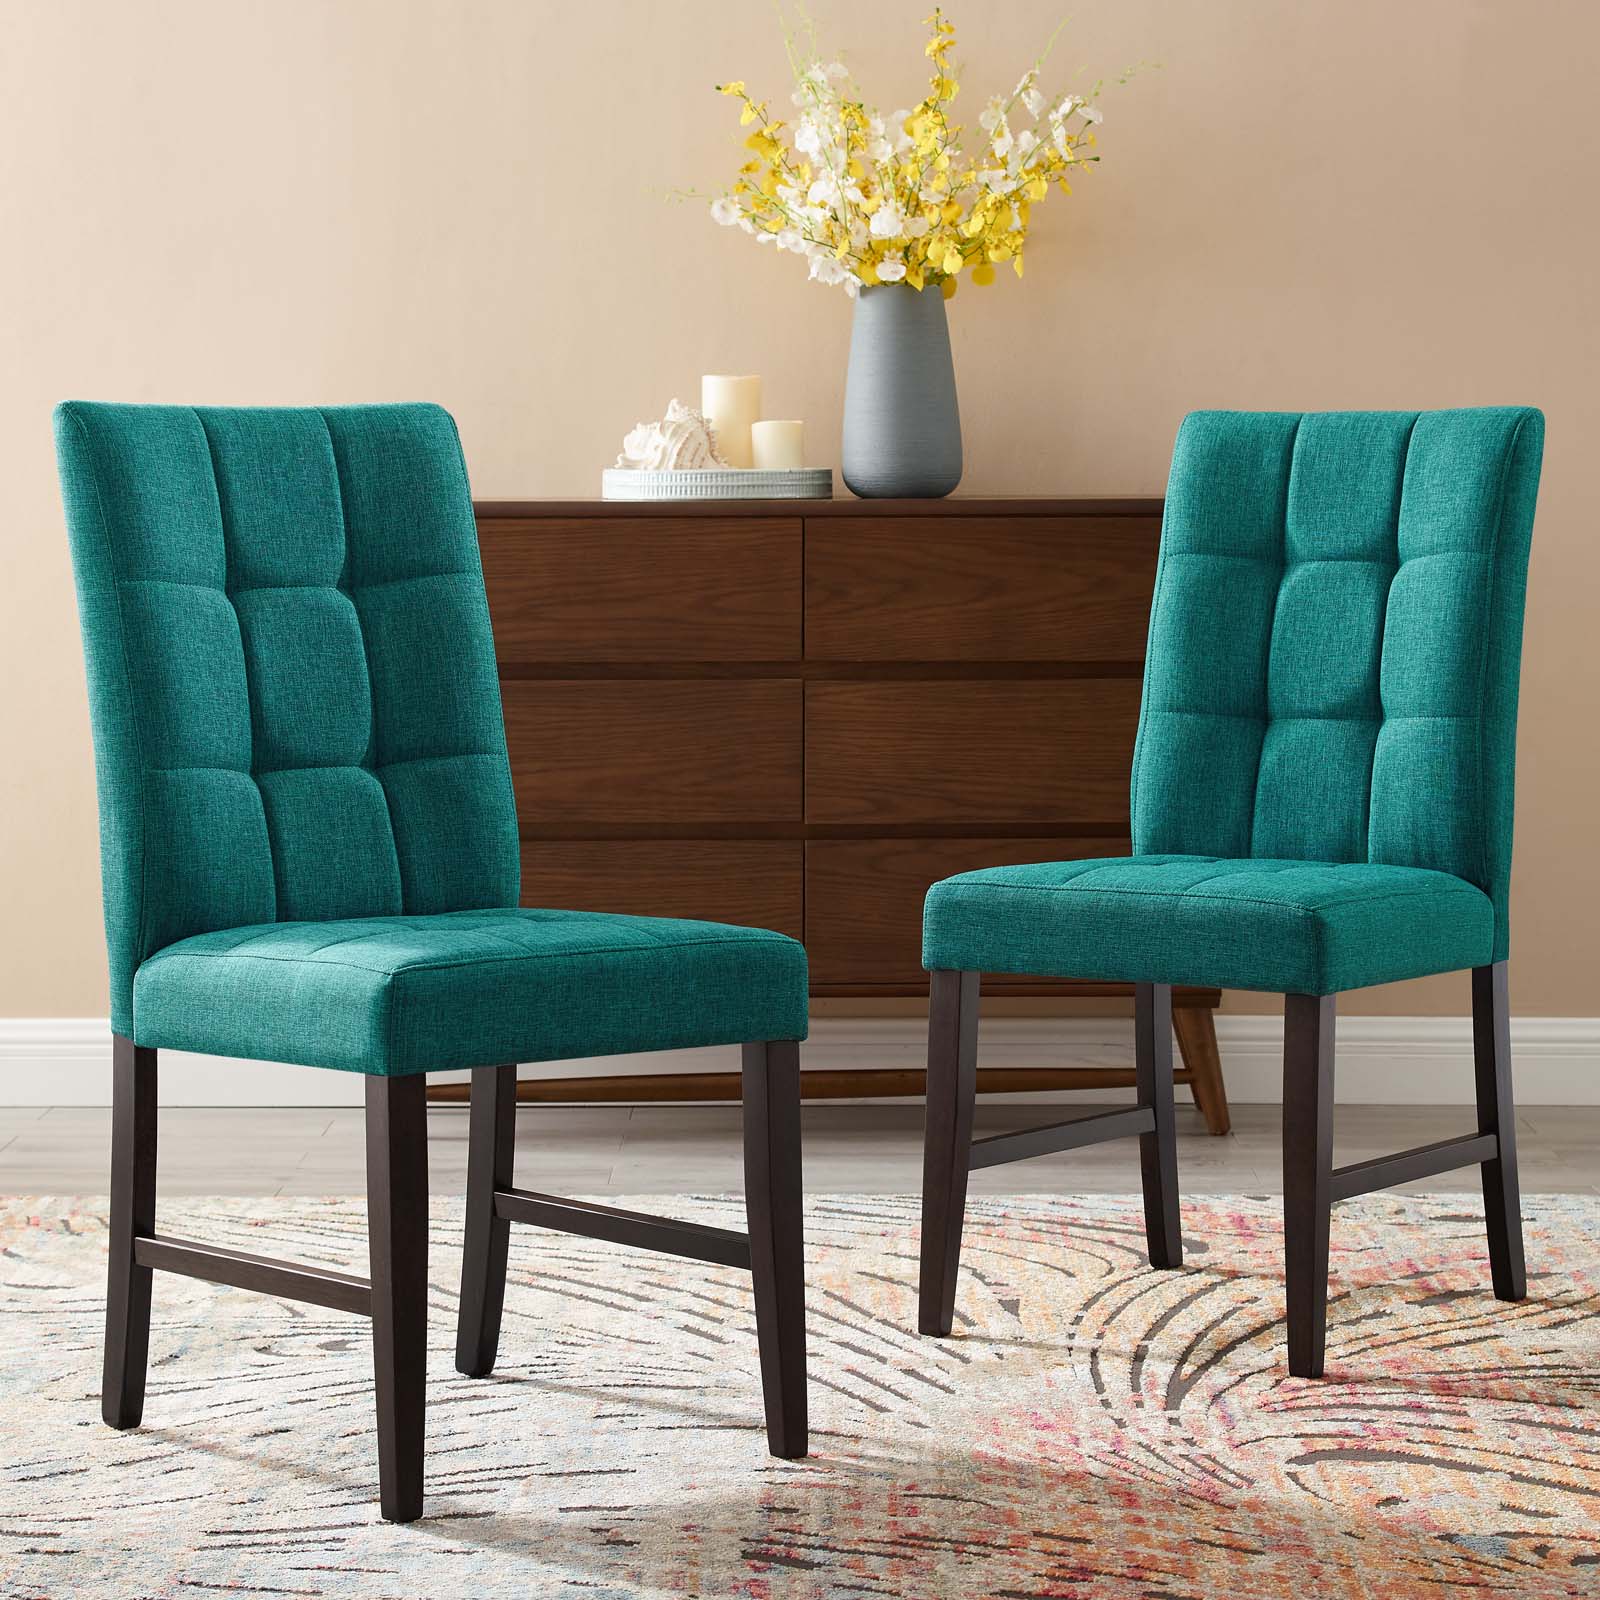 Modway Dining Chairs - Promulgate Biscuit Tufted Upholstered Fabric Dining Chair Set Of 2 Teal